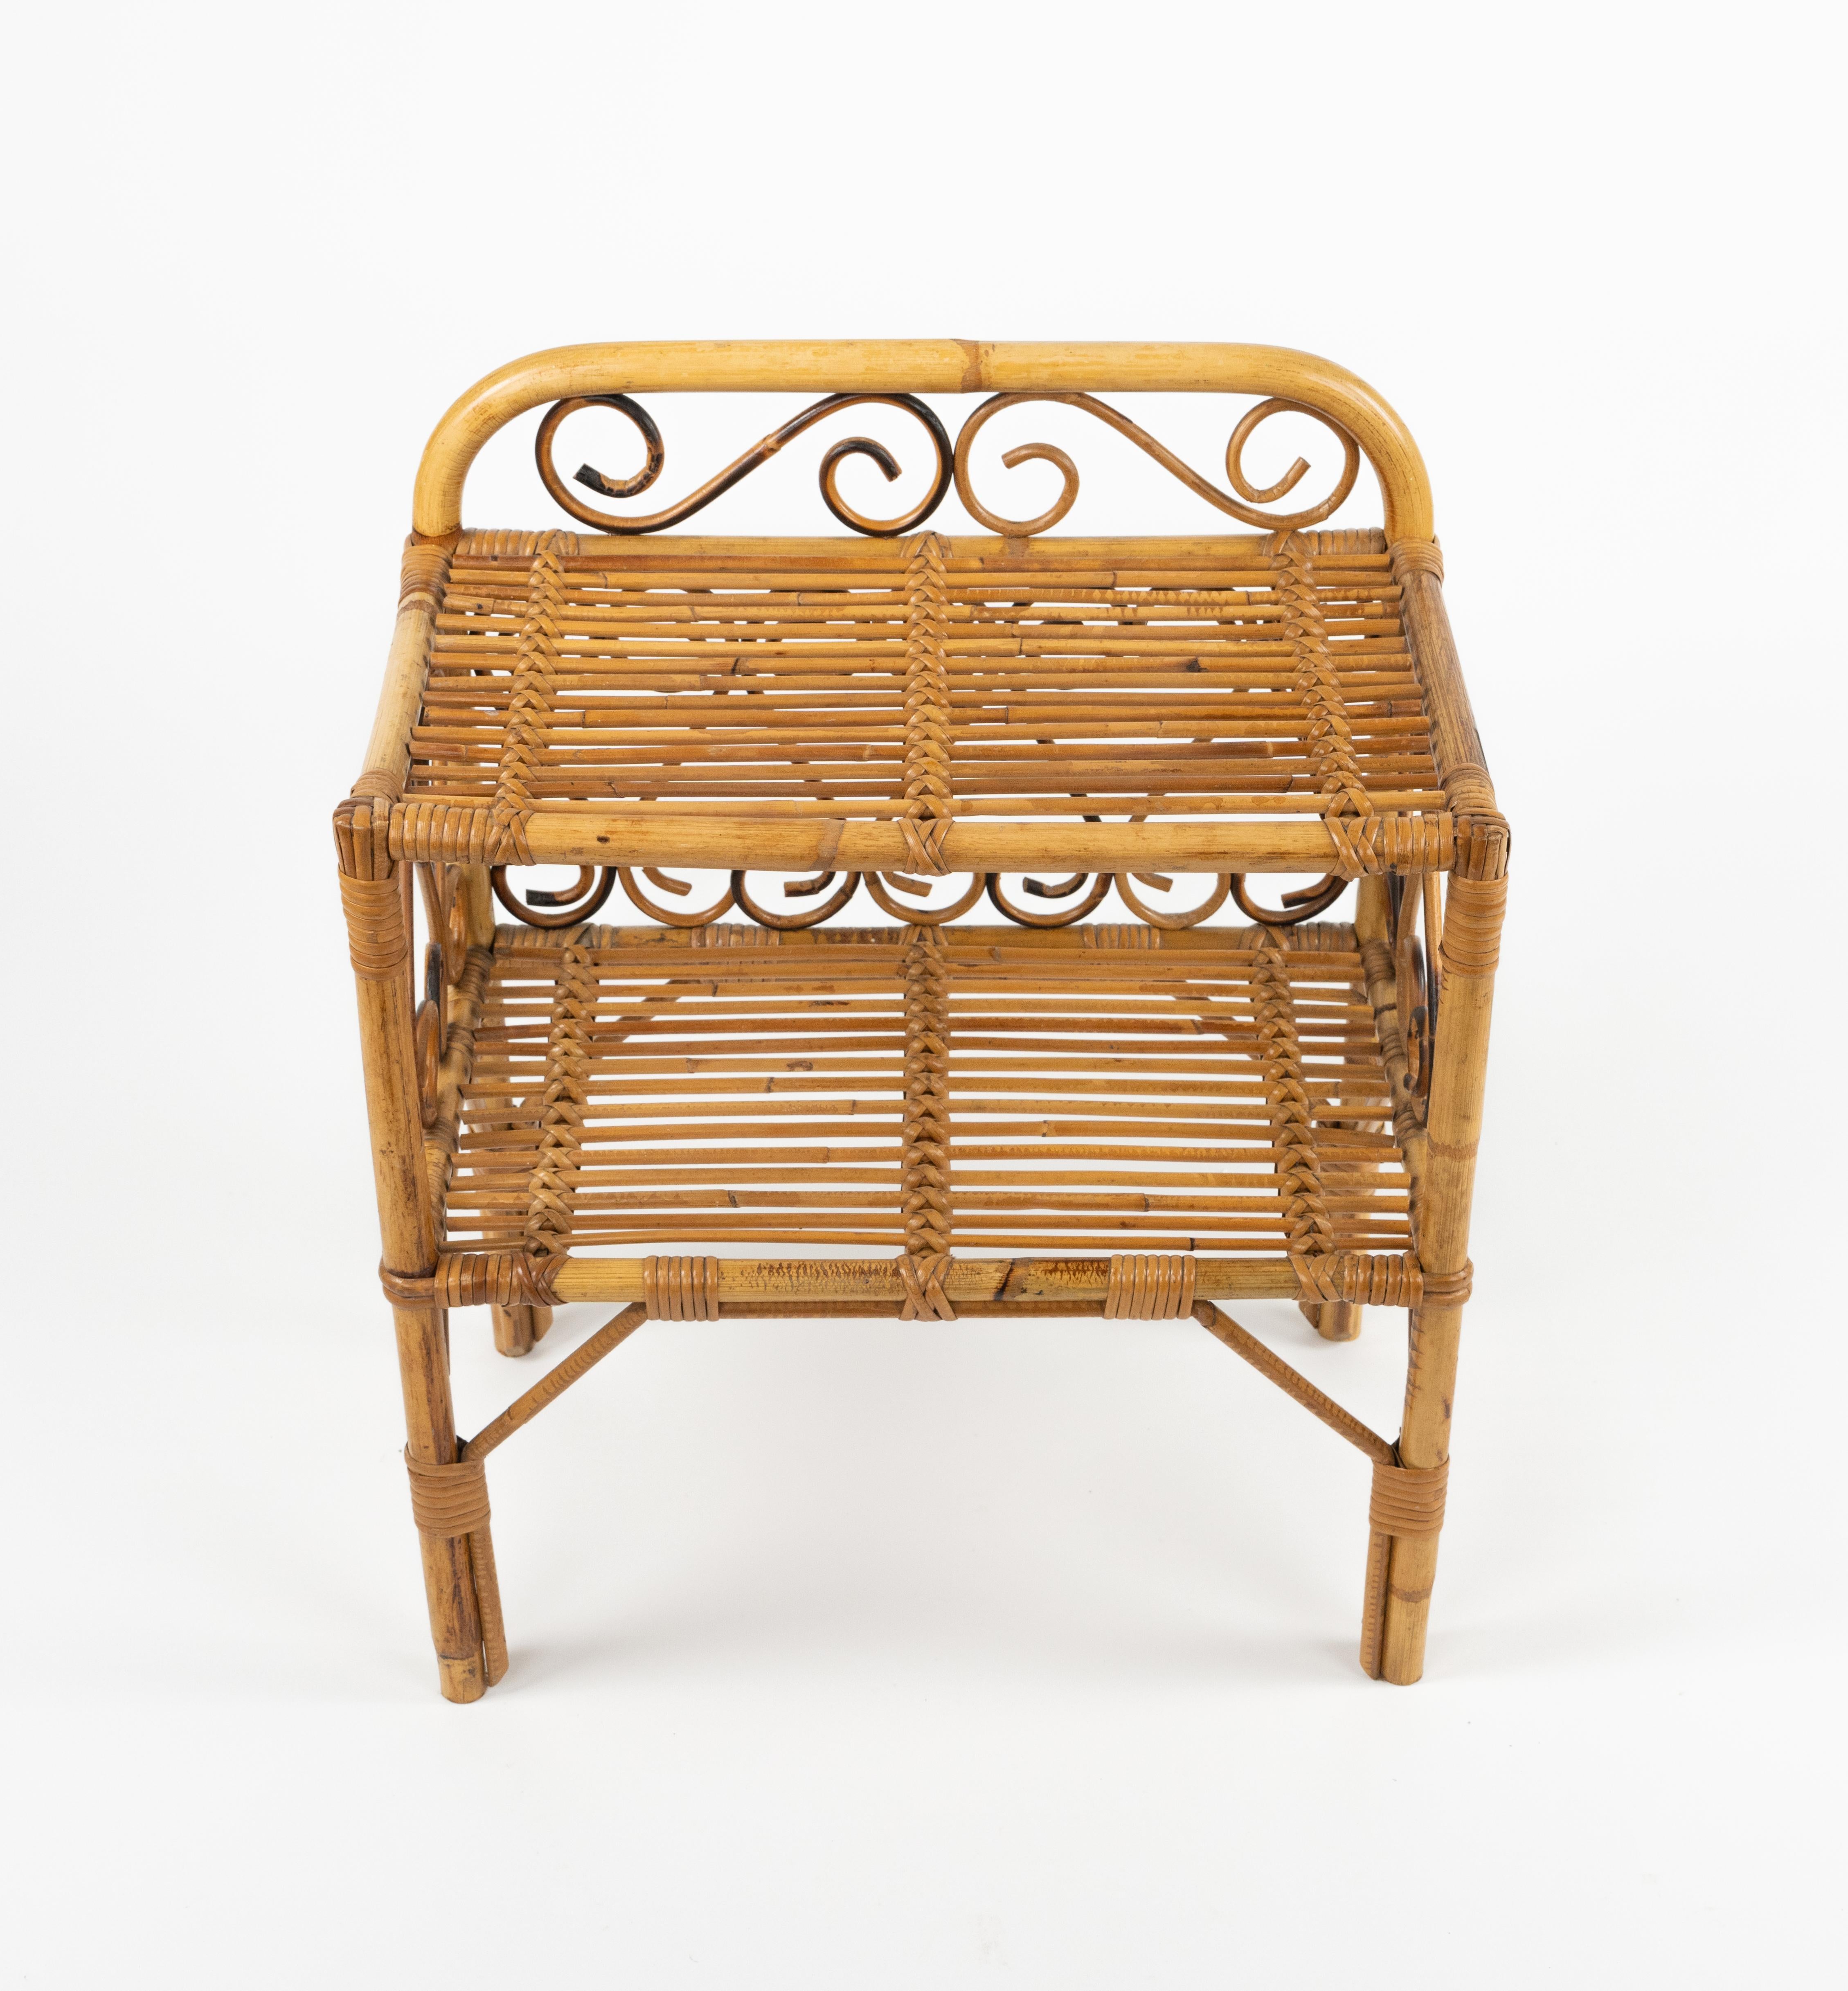 Midcentury Bamboo and Rattan Side Table Franco Albini Style, Italy 1960s For Sale 3